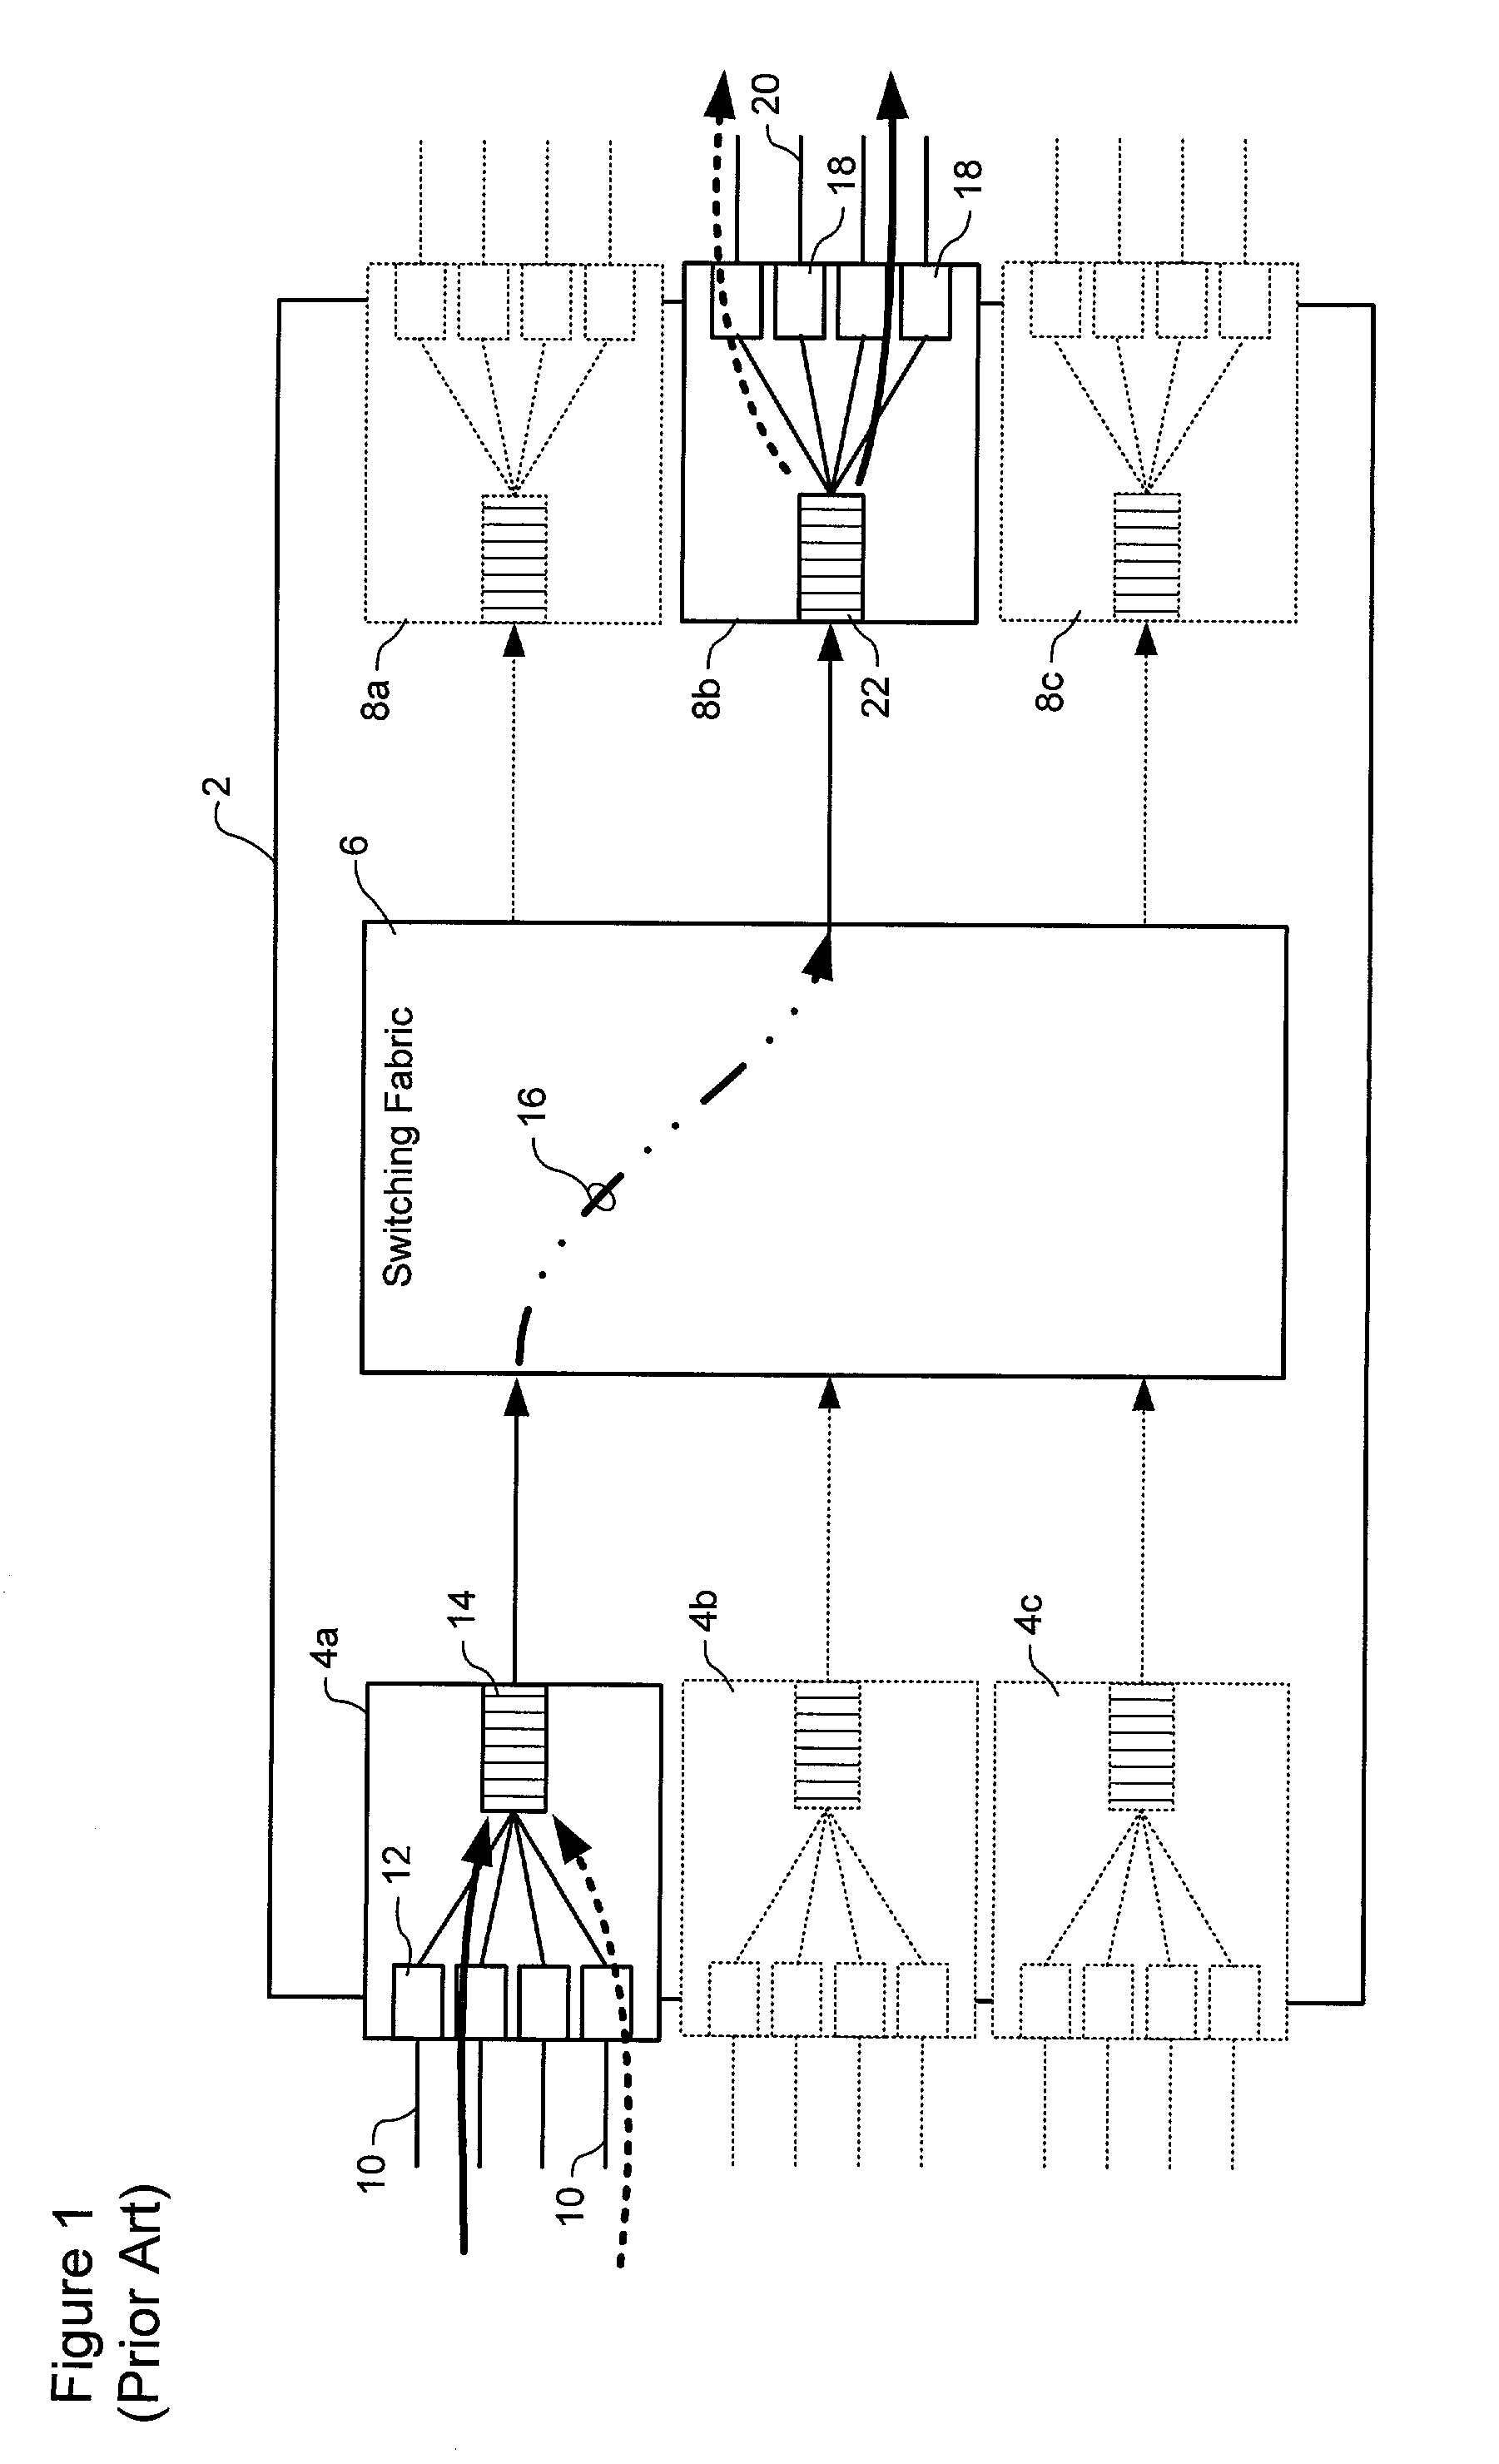 Traffic switching using multi-dimensional packet classification